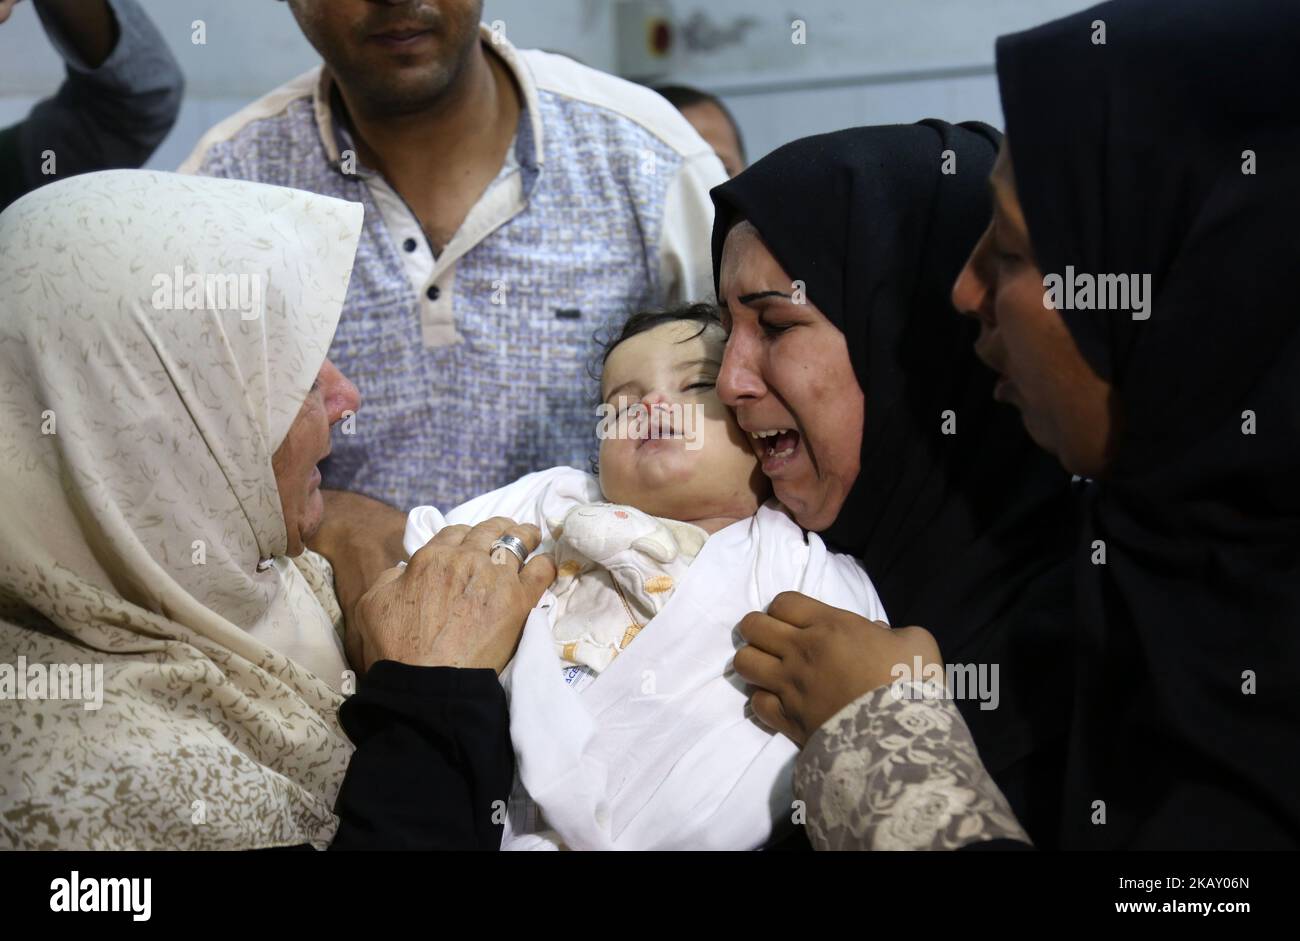 The mother of a Leila al-Ghandour (C), a Palestinian baby of 8 months who according to the Palestinian health ministry died of tear gas inhalation during clashes in East Gaza the previous day, holds her at the morgue of al-Shifa hospital in Gaza City on May 15, 2018 Fresh protests are expected a day after Israeli forces killed 59 Palestinians during clashes and protests along the Gaza border against the US embassy opening in Jerusalem in the conflict's bloodiest day in years. (Photo by Majdi Fathi/NurPhoto) Stock Photo